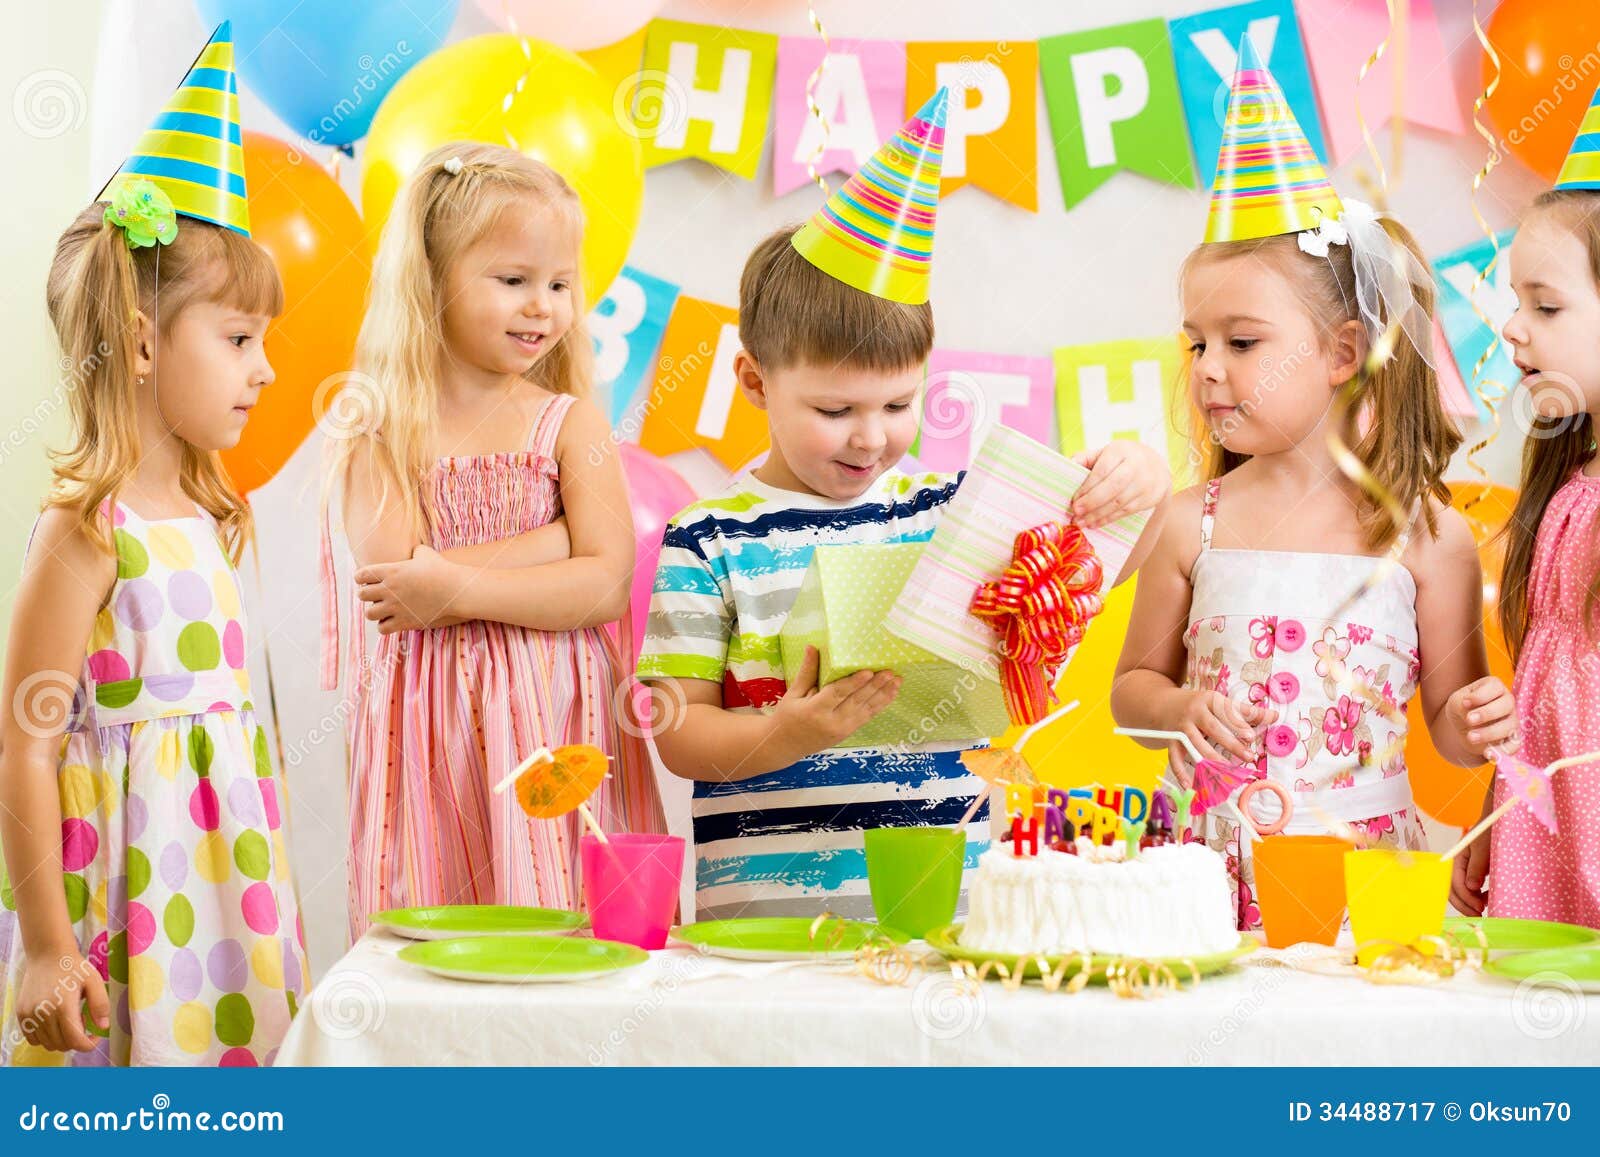 Kids on birthday holiday stock image. Image of candles - 34488717